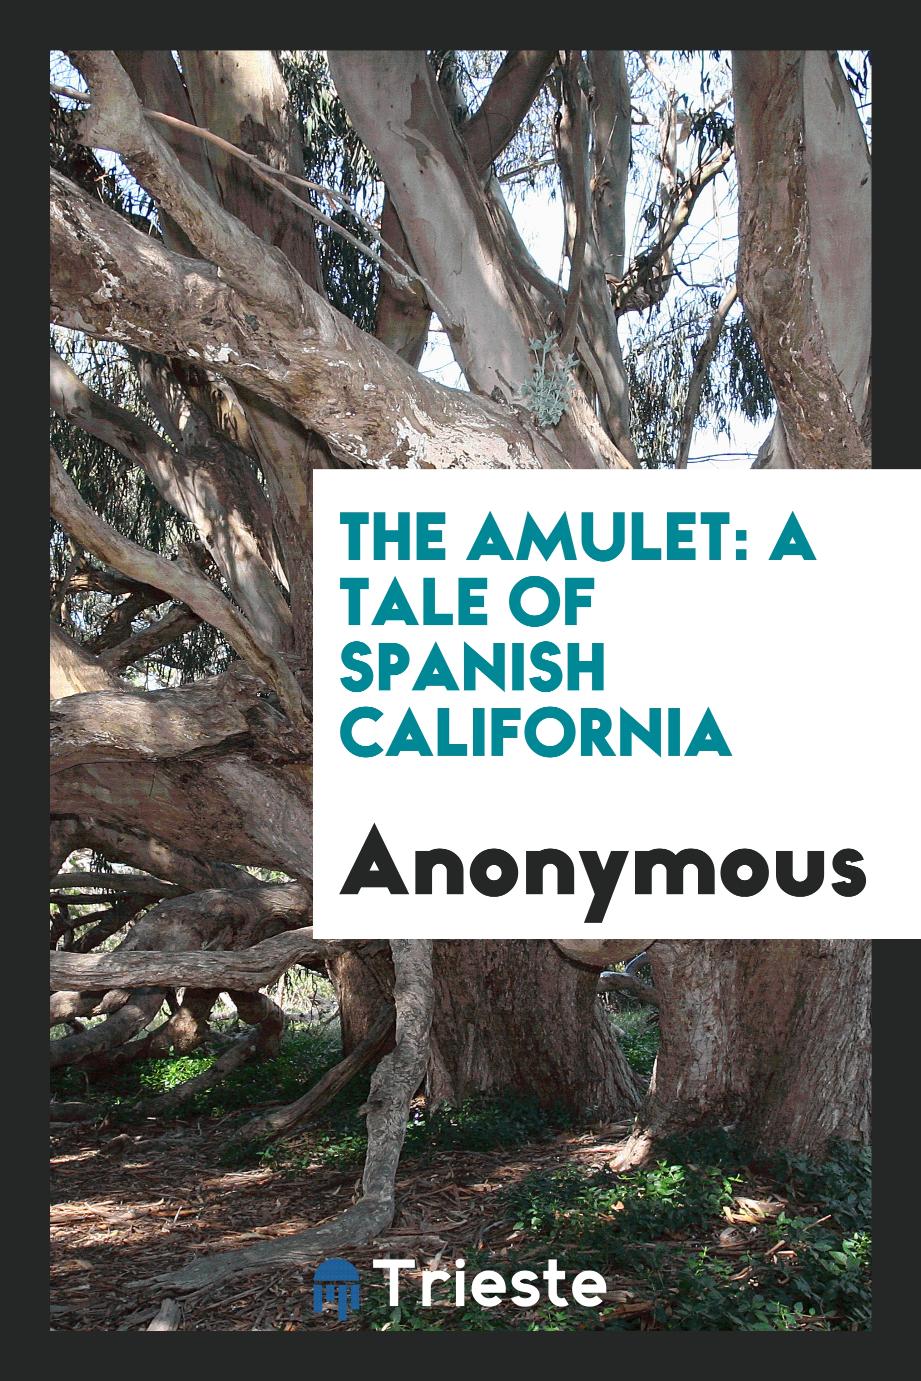 The amulet: a tale of Spanish California